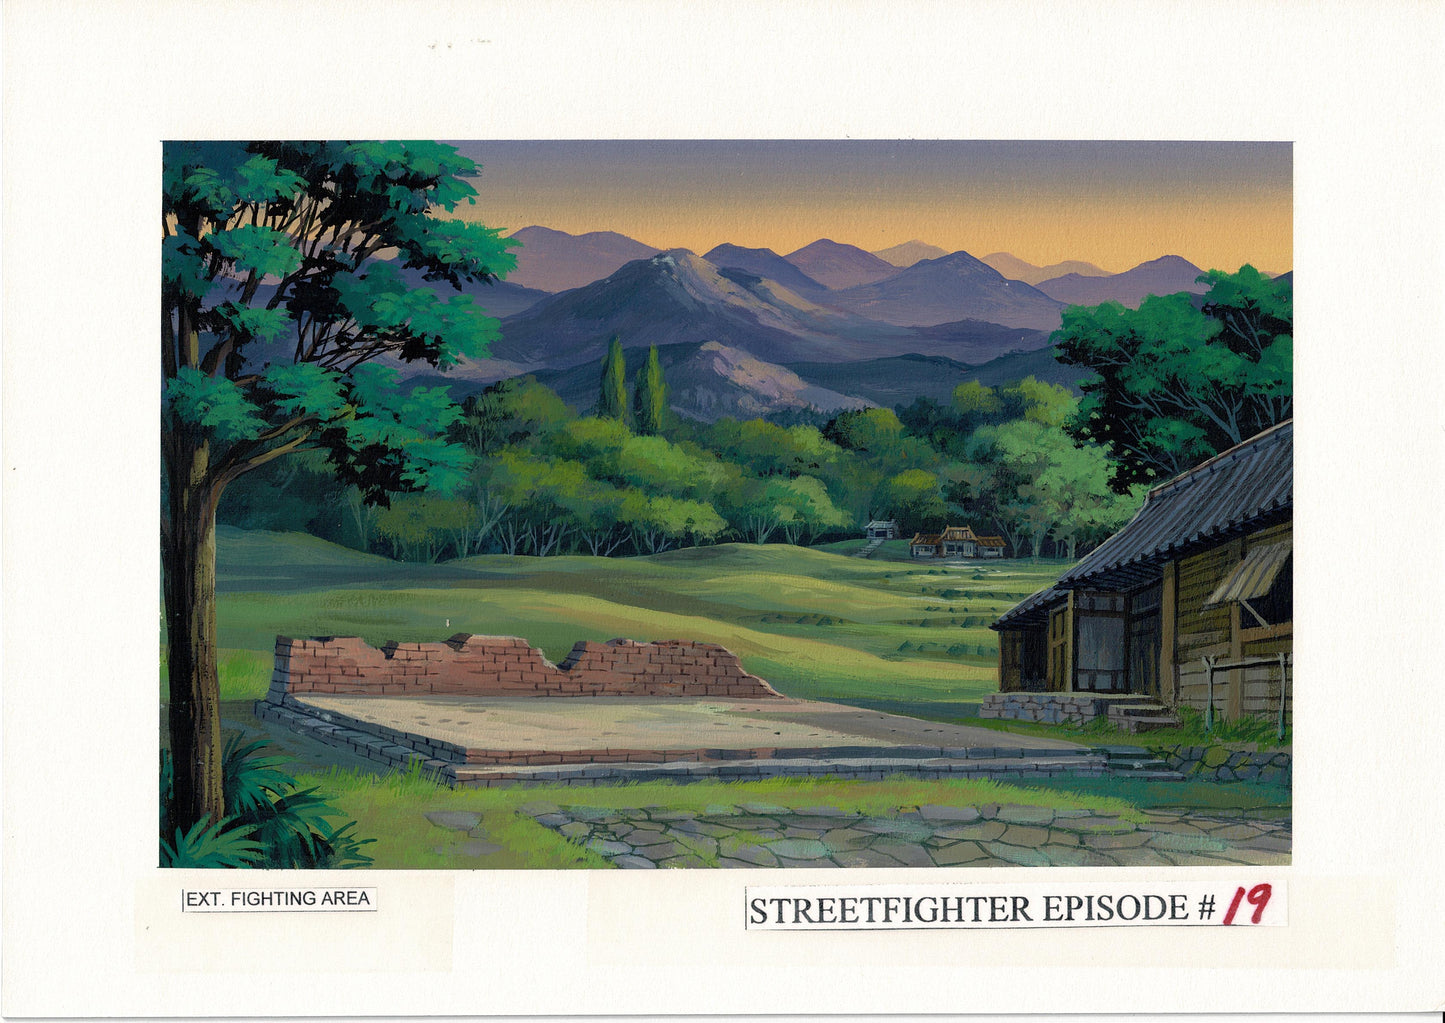 Street Fighter Hand Painted Background KEY Used to Make Cartoon of Fighting Area Episode 19